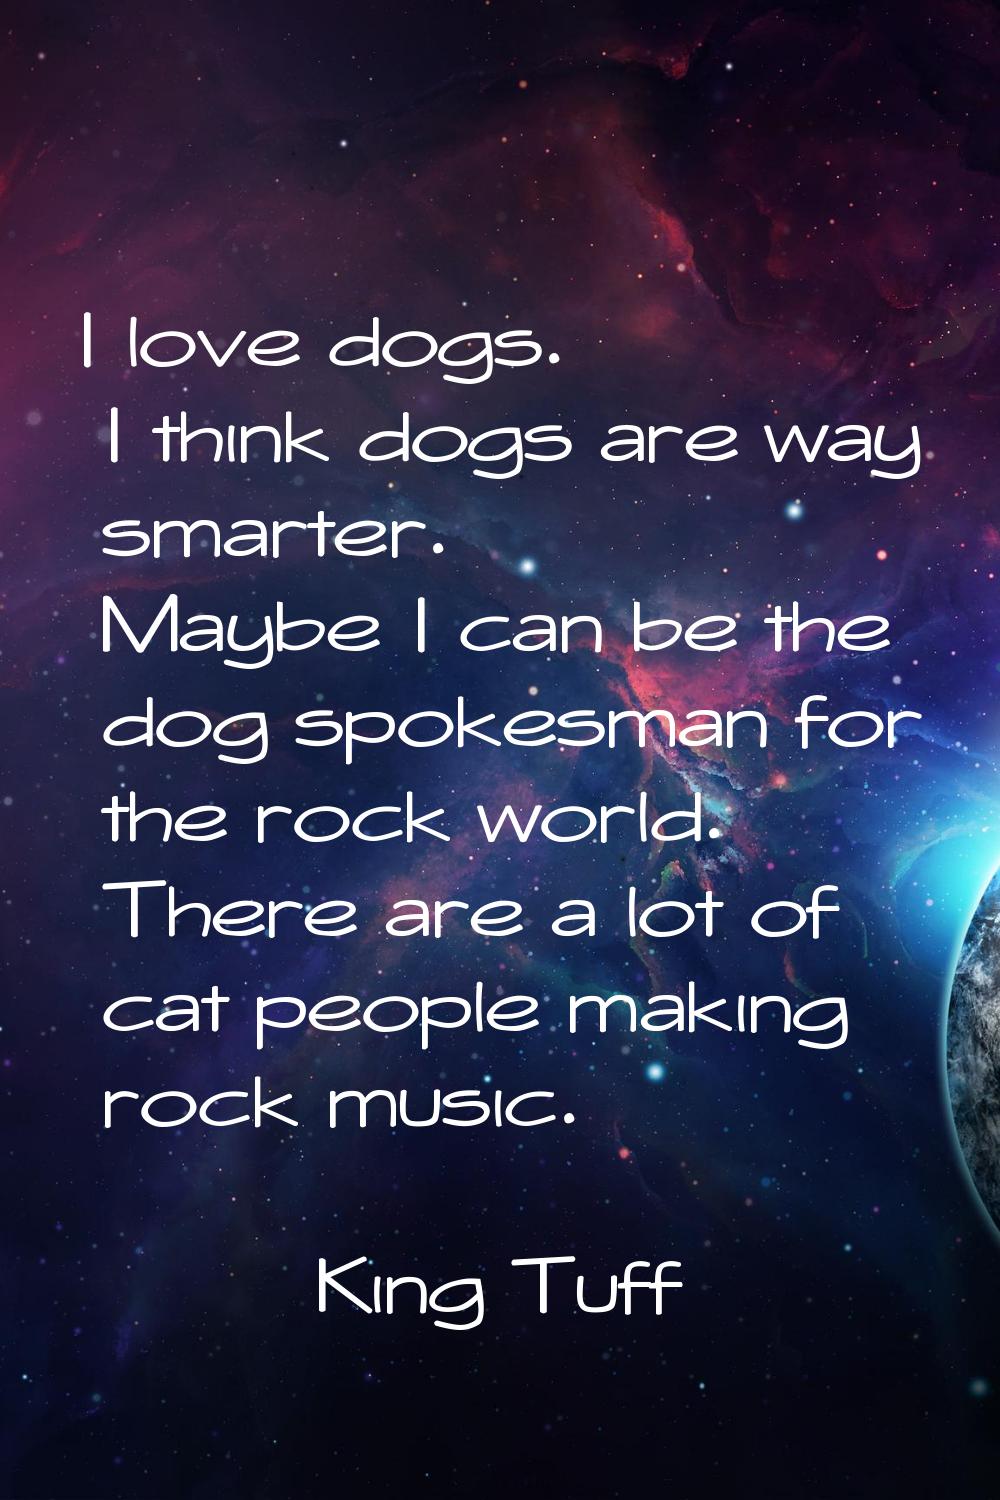 I love dogs. I think dogs are way smarter. Maybe I can be the dog spokesman for the rock world. The